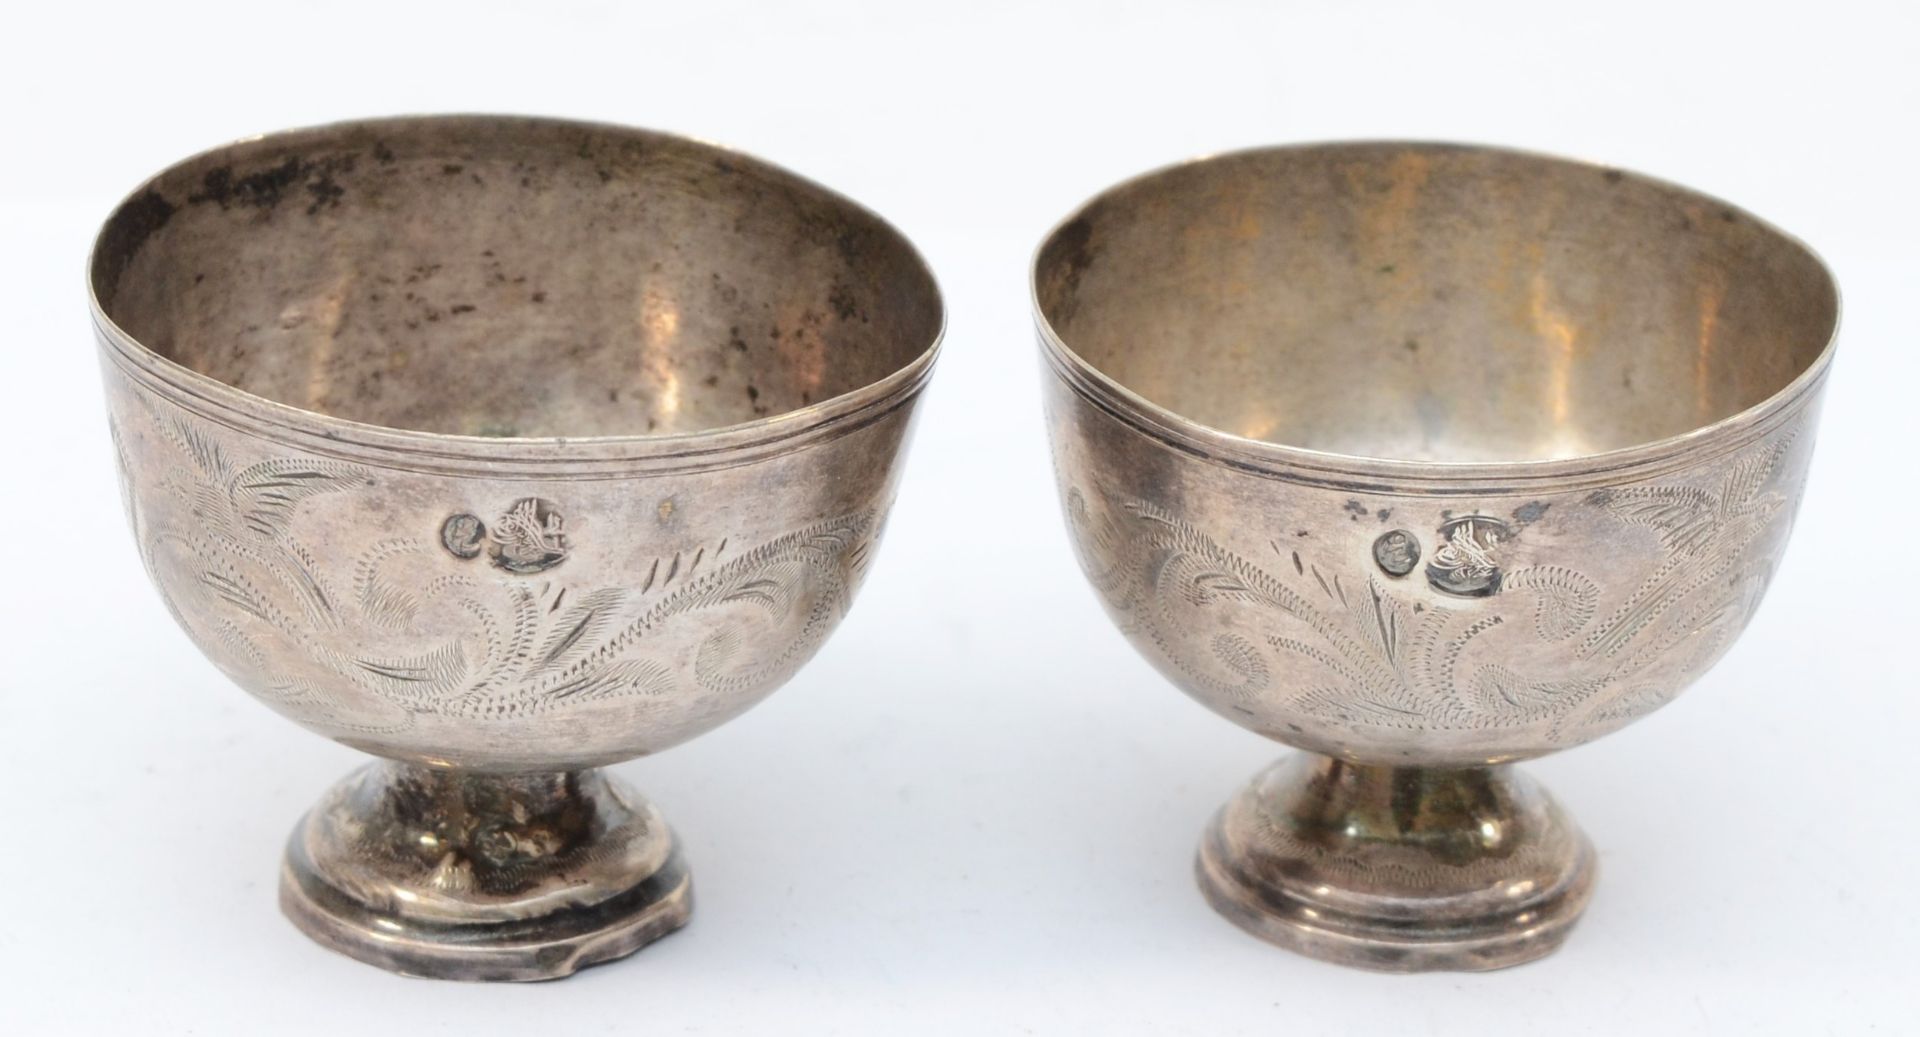 Two Ottoman Empire silver cups with chased scrolling decoration, 4.5 x 5.5cm, 52gm. - Image 4 of 4